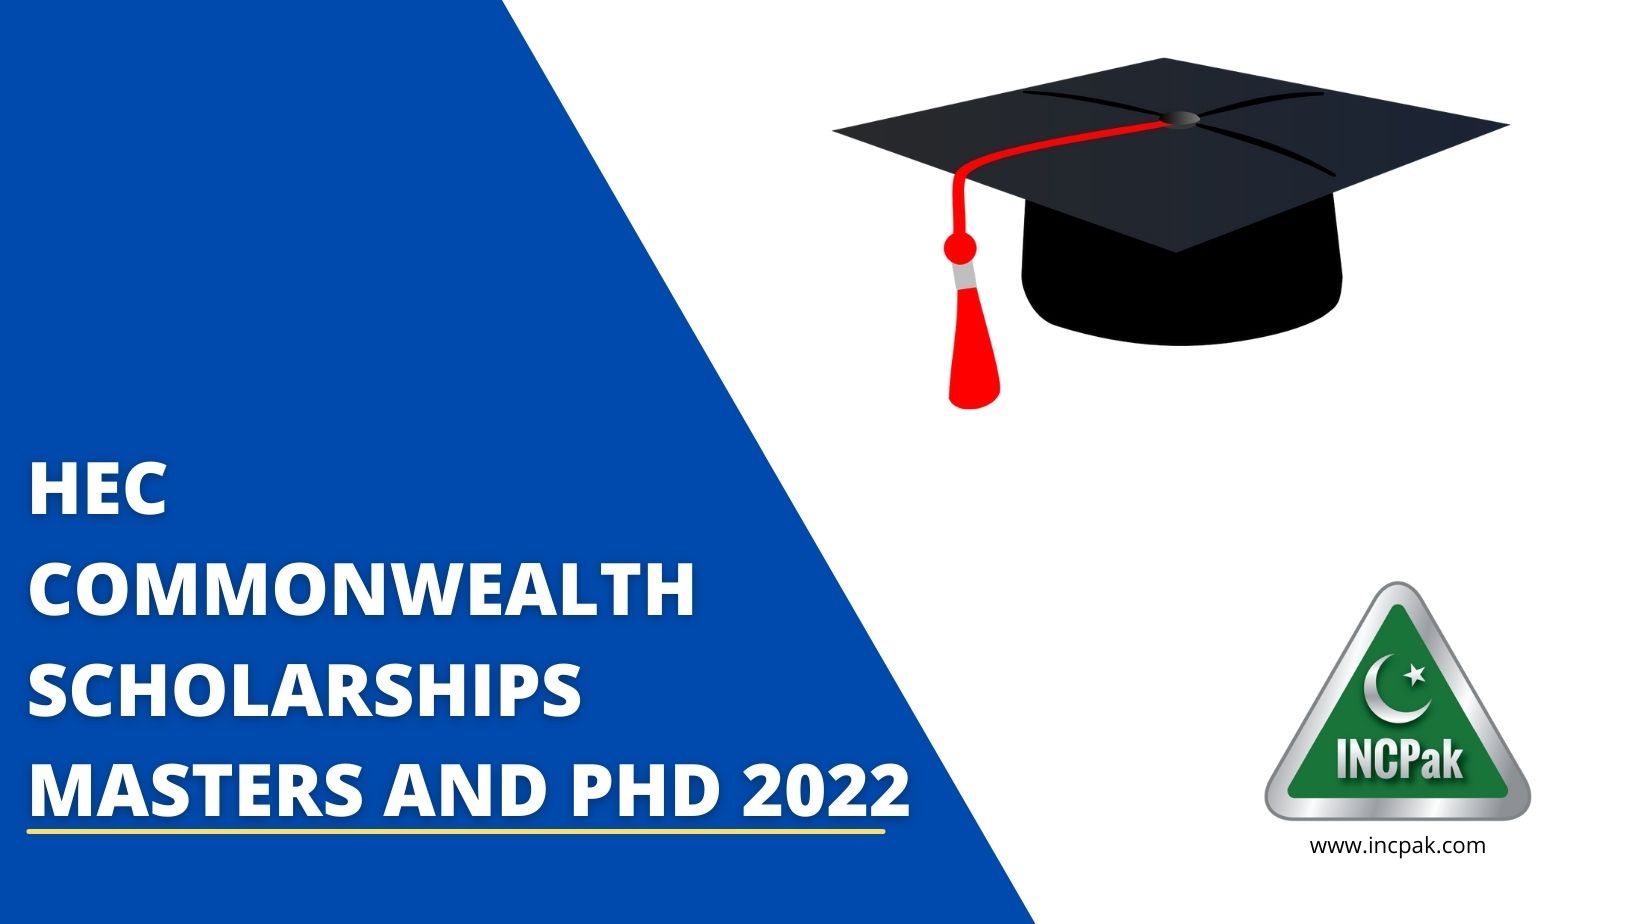 hec scholarship for phd students